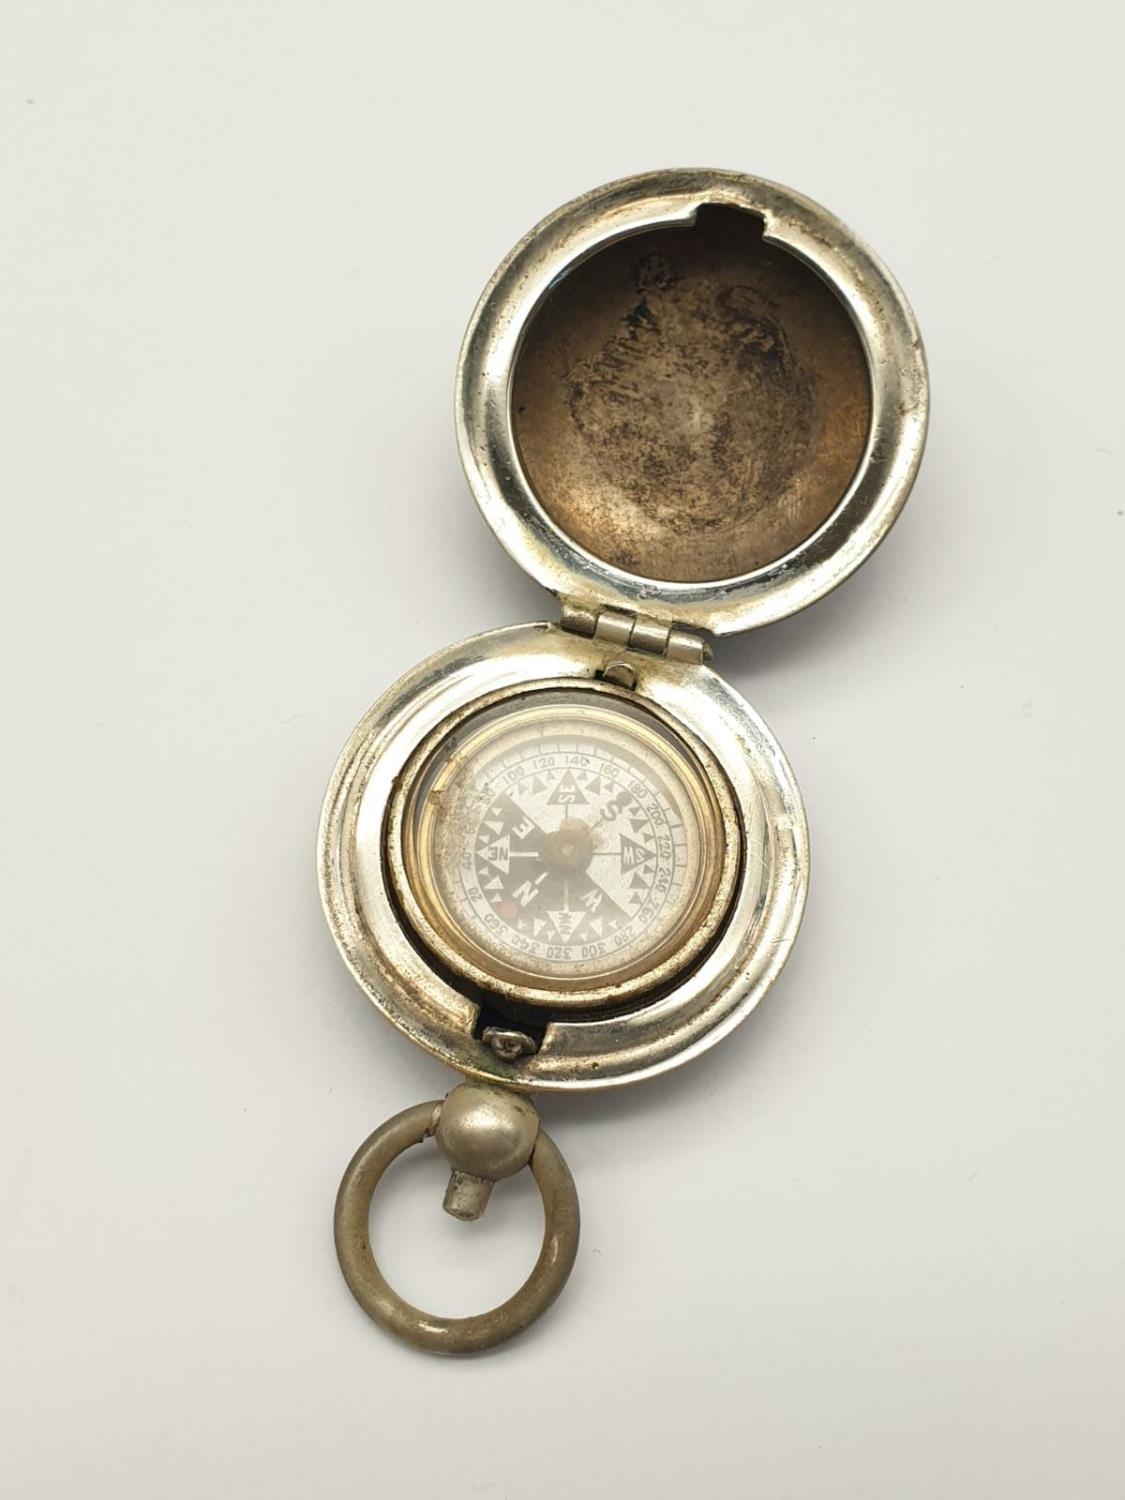 WW2 British Officers Cased Compass with a Royal Army Service Corps Badge - Image 2 of 6